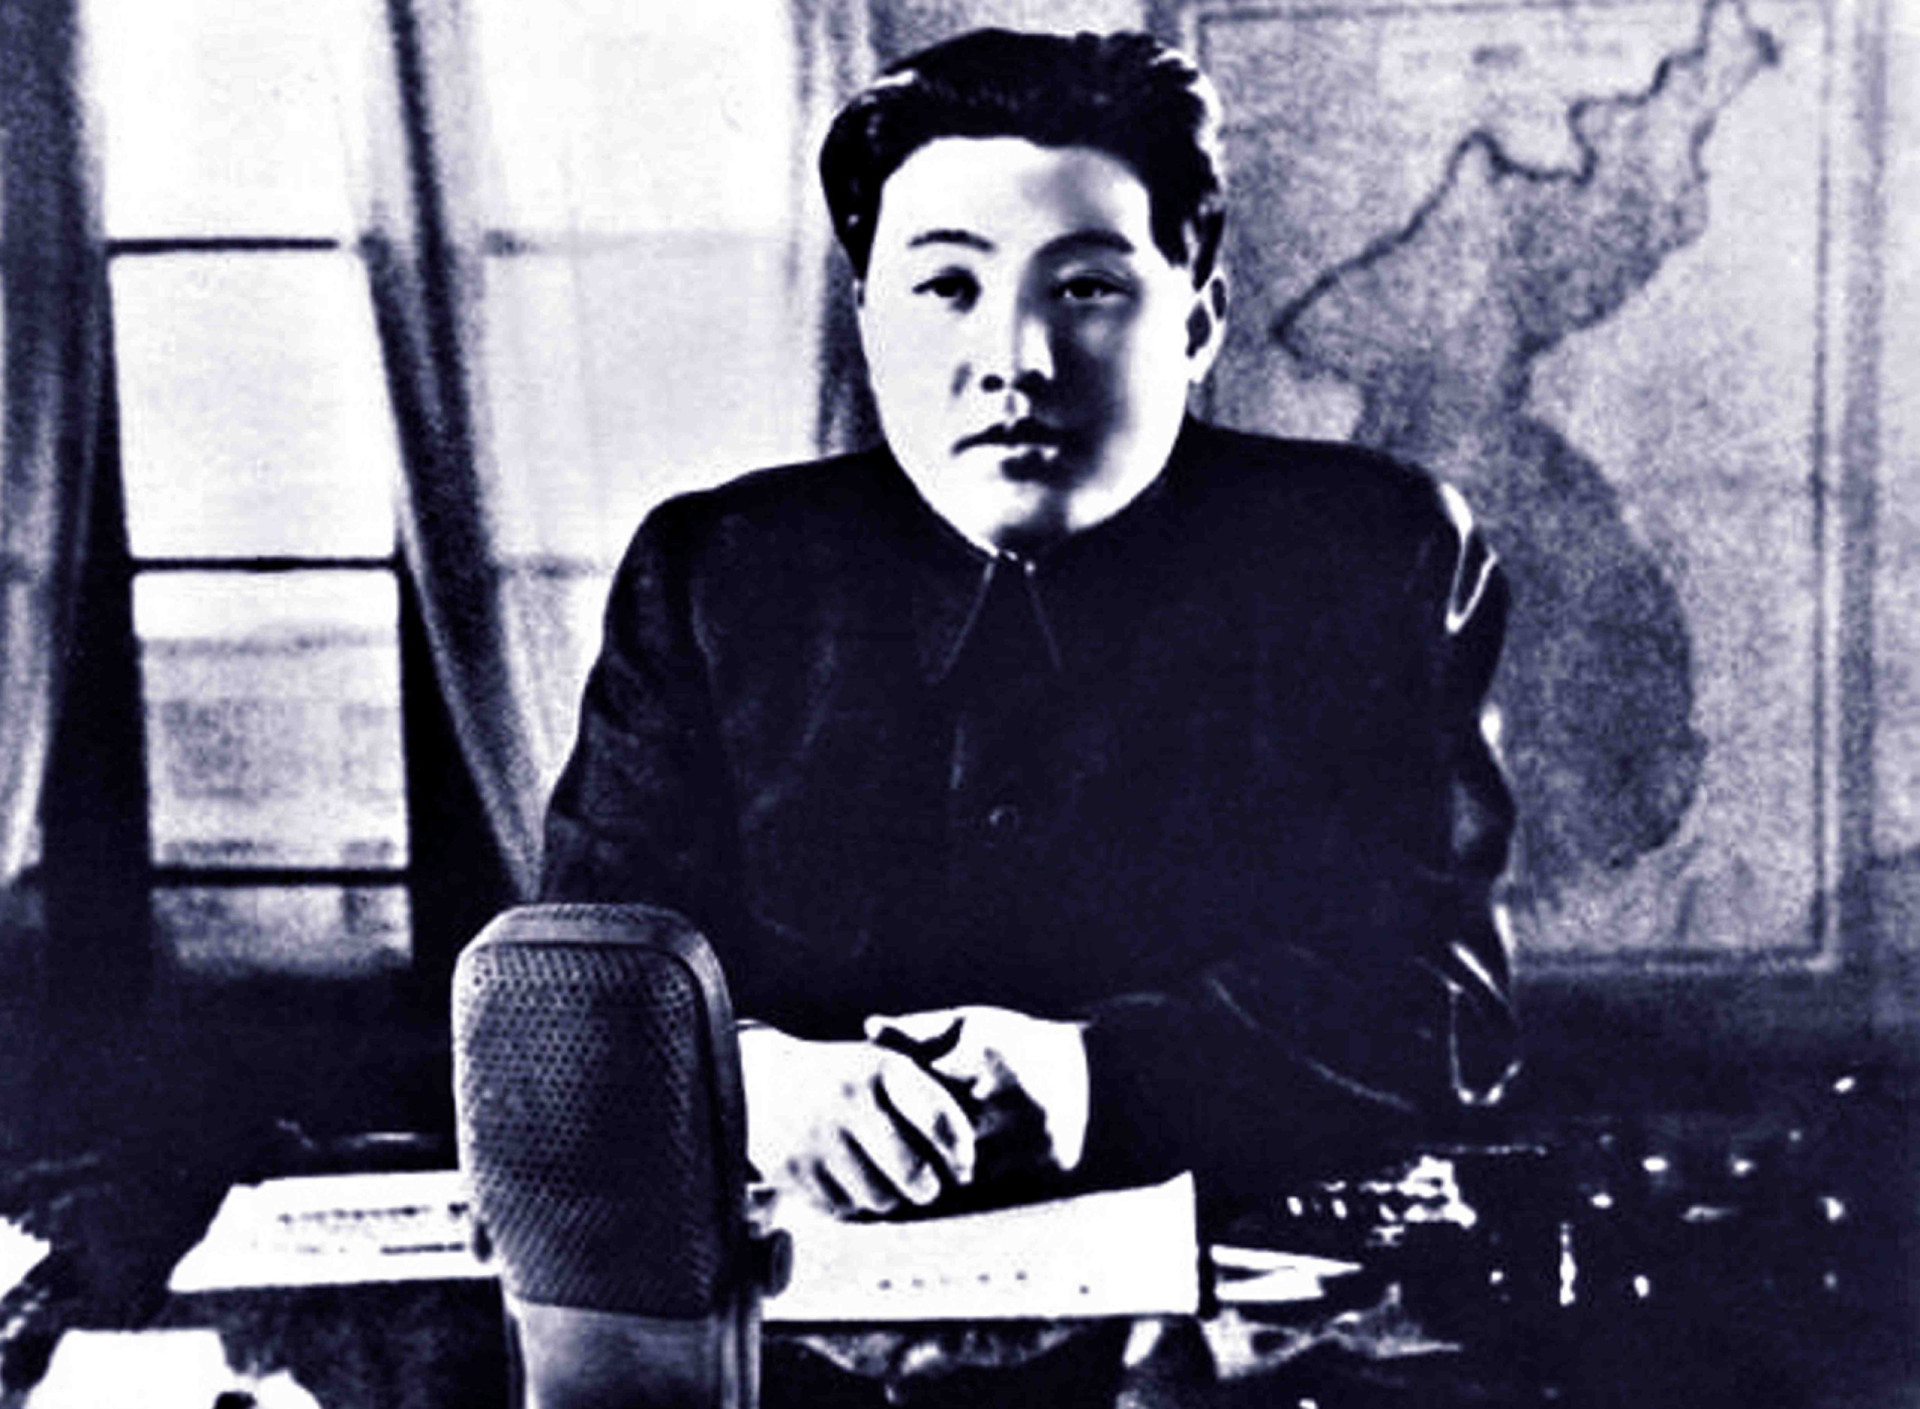 <p>Not much is known about Anna Wallis Suh's further involvement with the North Korean government, or indeed what happened to her. In his memoir, former defected soldier Charles Jenkins stated that "Seoul City Sue" was in fact a double agent working for South Korea, and that she was eventually killed.</p><p><a href="https://www.msn.com/en-us/community/channel/vid-7xx8mnucu55yw63we9va2gwr7uihbxwc68fxqp25x6tg4ftibpra?cvid=94631541bc0f4f89bfd59158d696ad7e">Follow us and access great exclusive content every day</a></p>